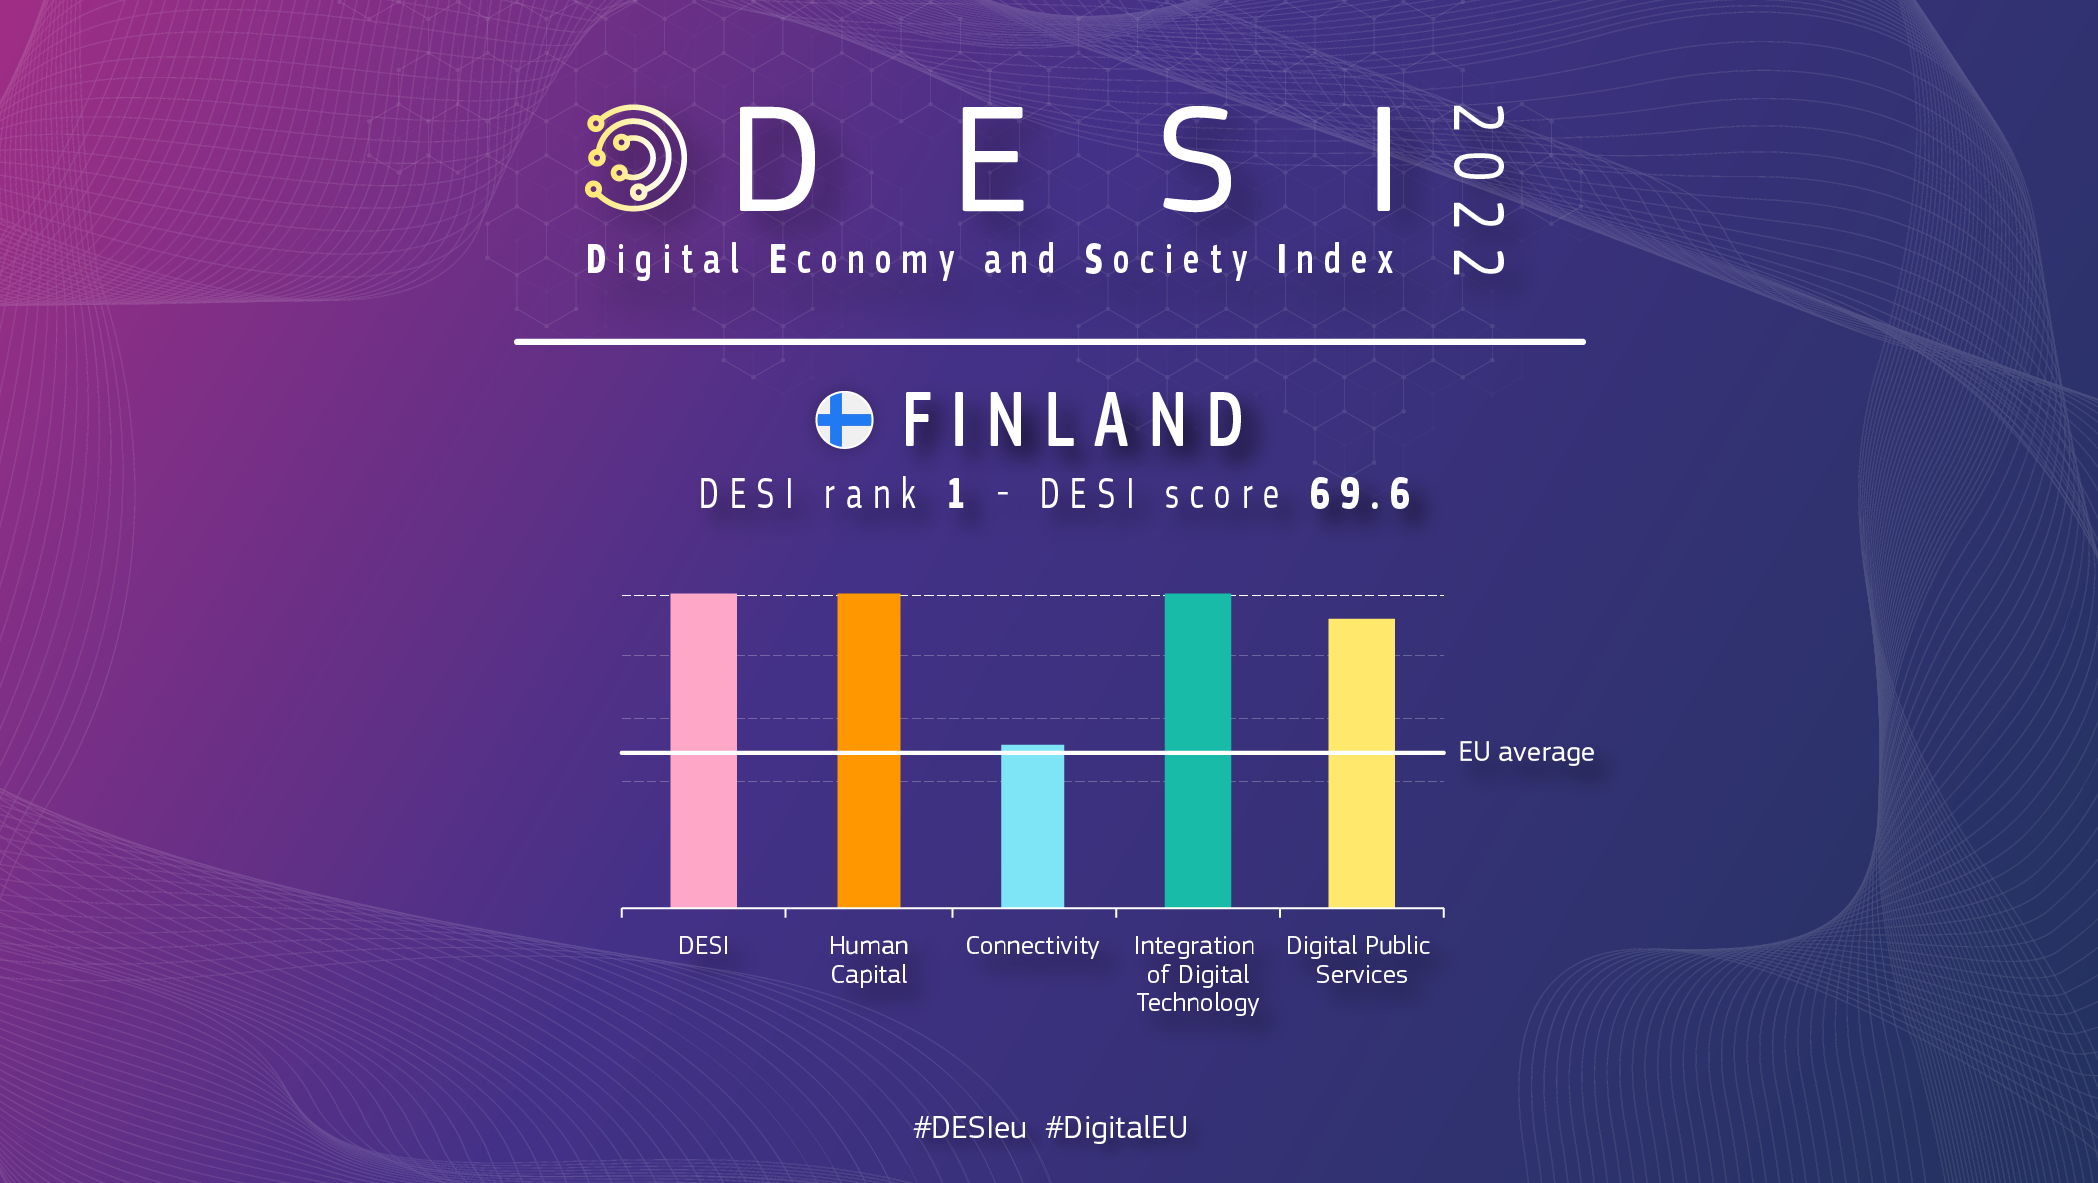 Graphic overview of Finland in DESI showing a ranking of 1 and a score of 69.6